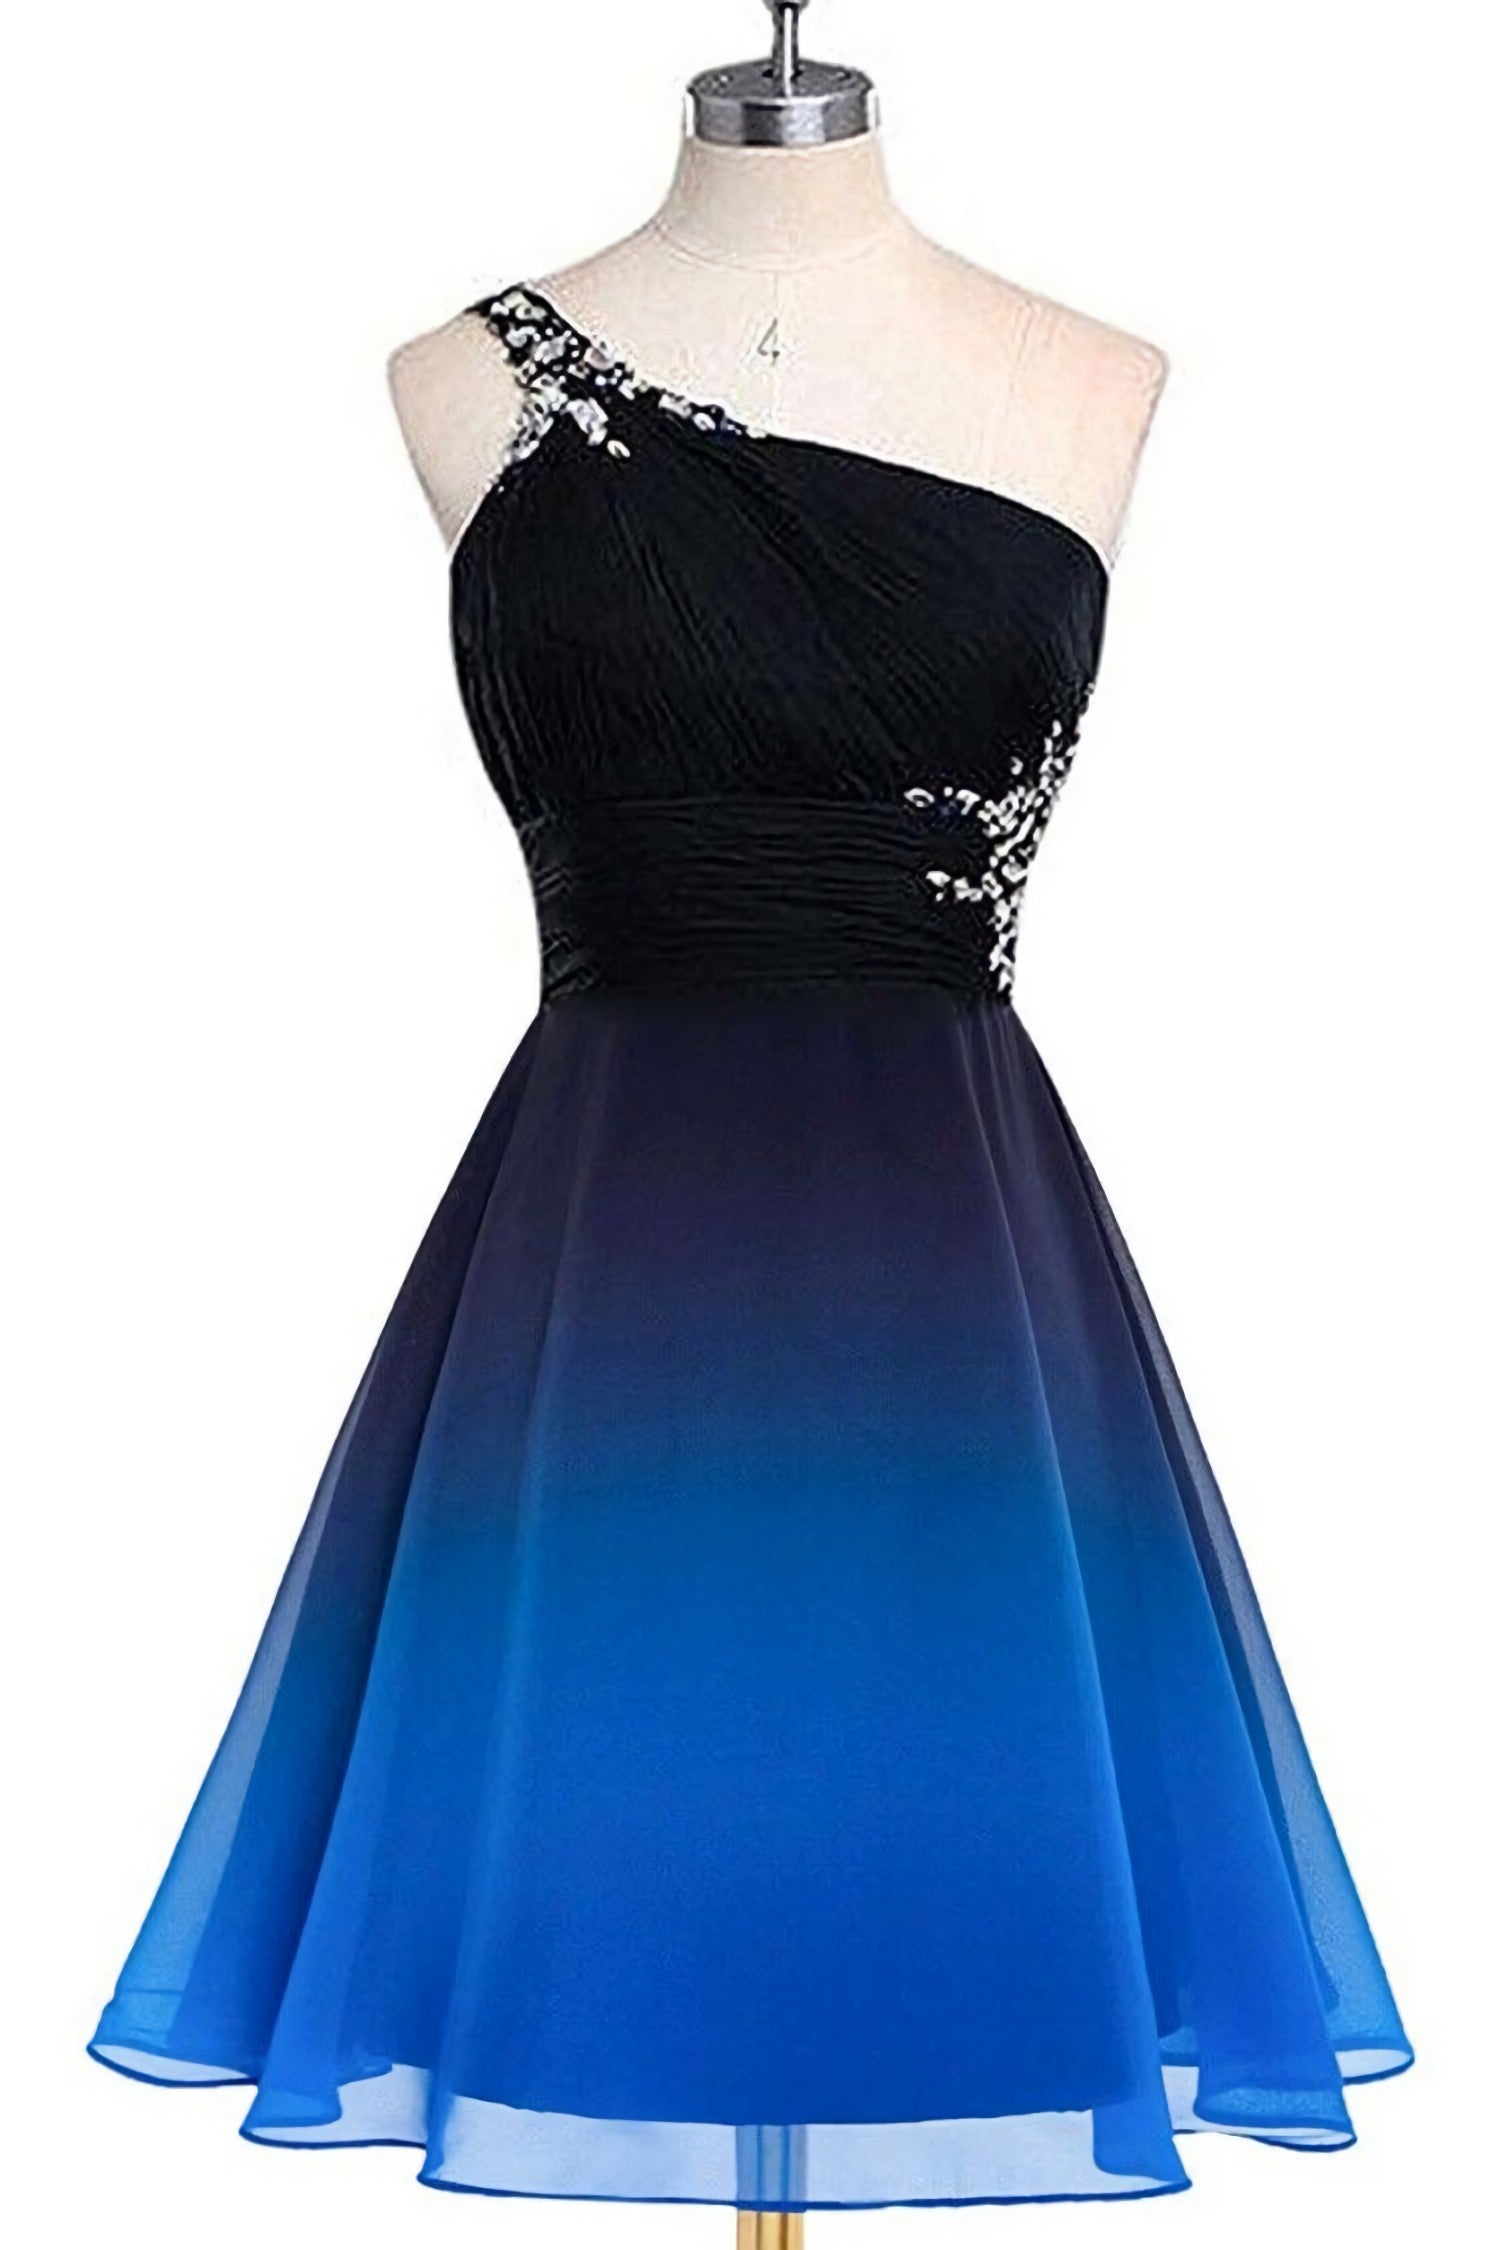 Prom Dresses For Girl, A Line Ombre Blue And Black One Shoulder Short Dc289 Prom Dresses